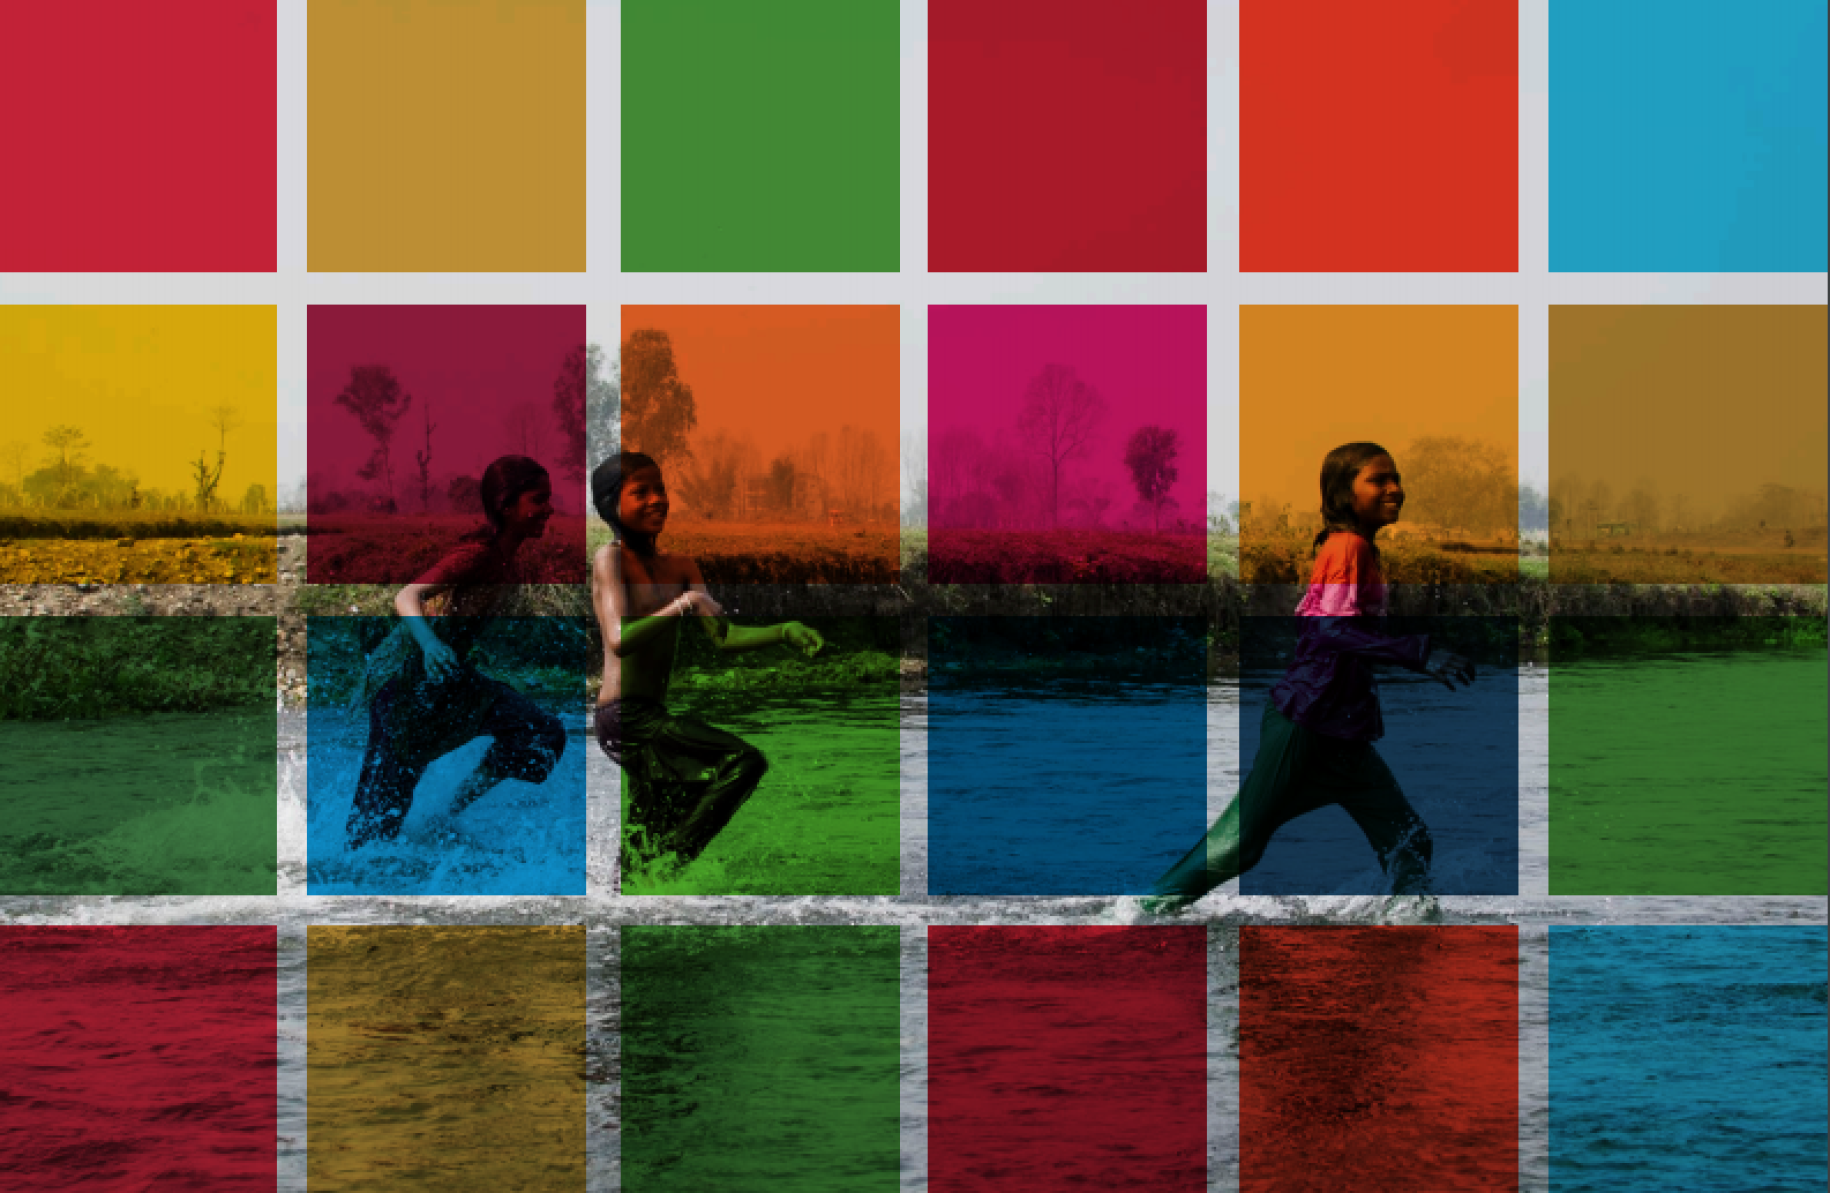 Report cover image showing kids playing in water behind a colourful tile overlay.